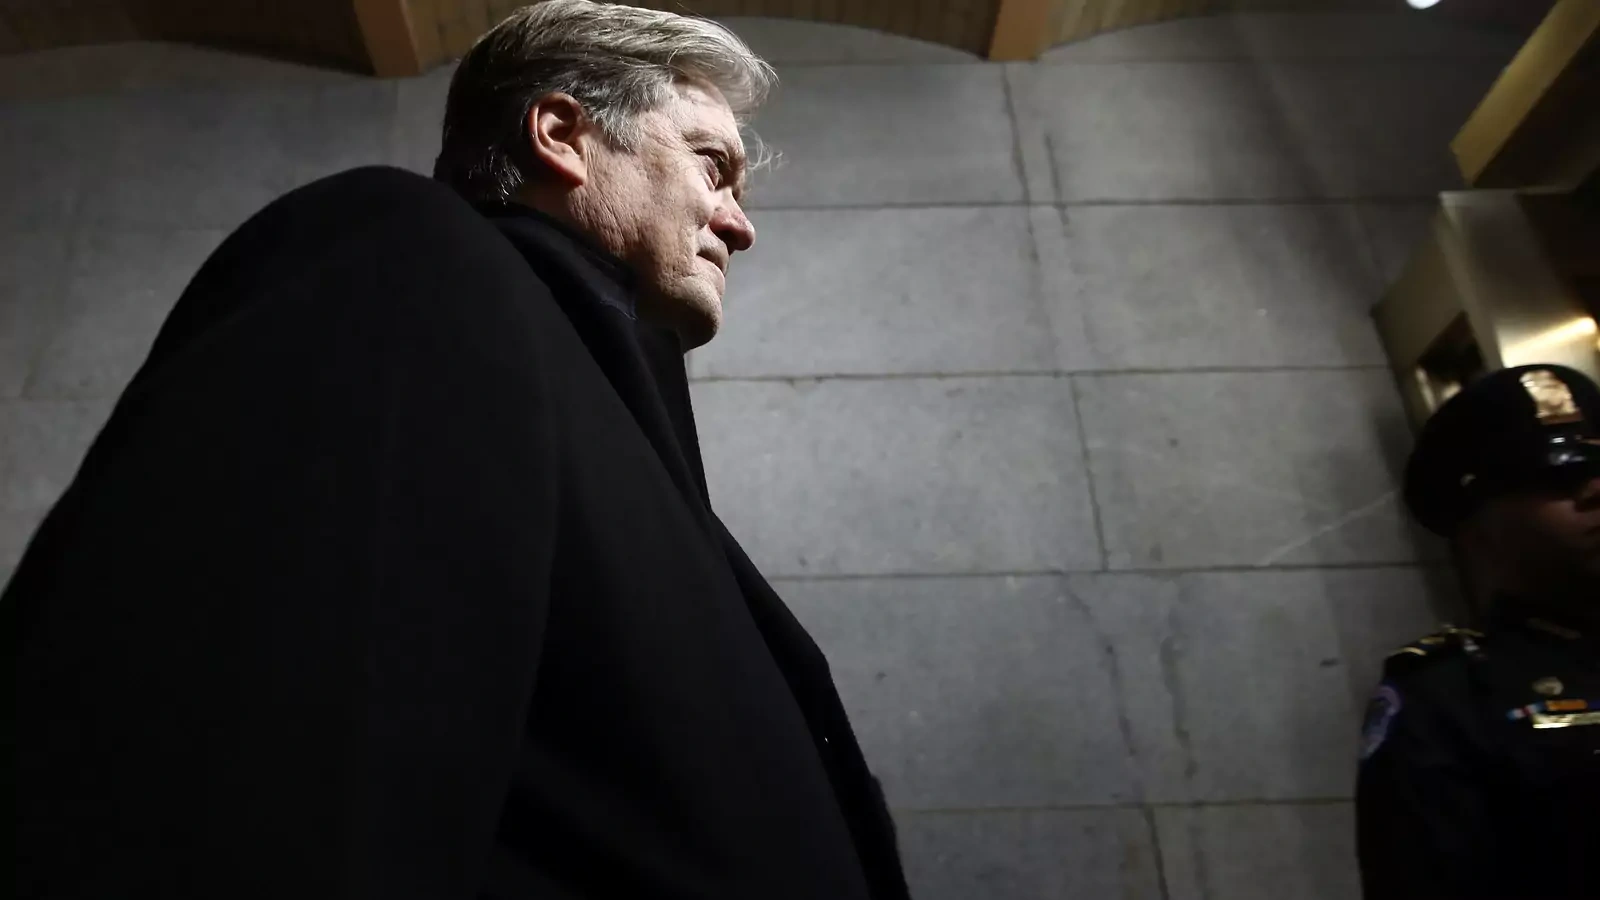 Former Senior Counselor to the President Steve Bannon arrives before the presidential inauguration on the West Front of the U.S. Capitol on January 20, 2017.